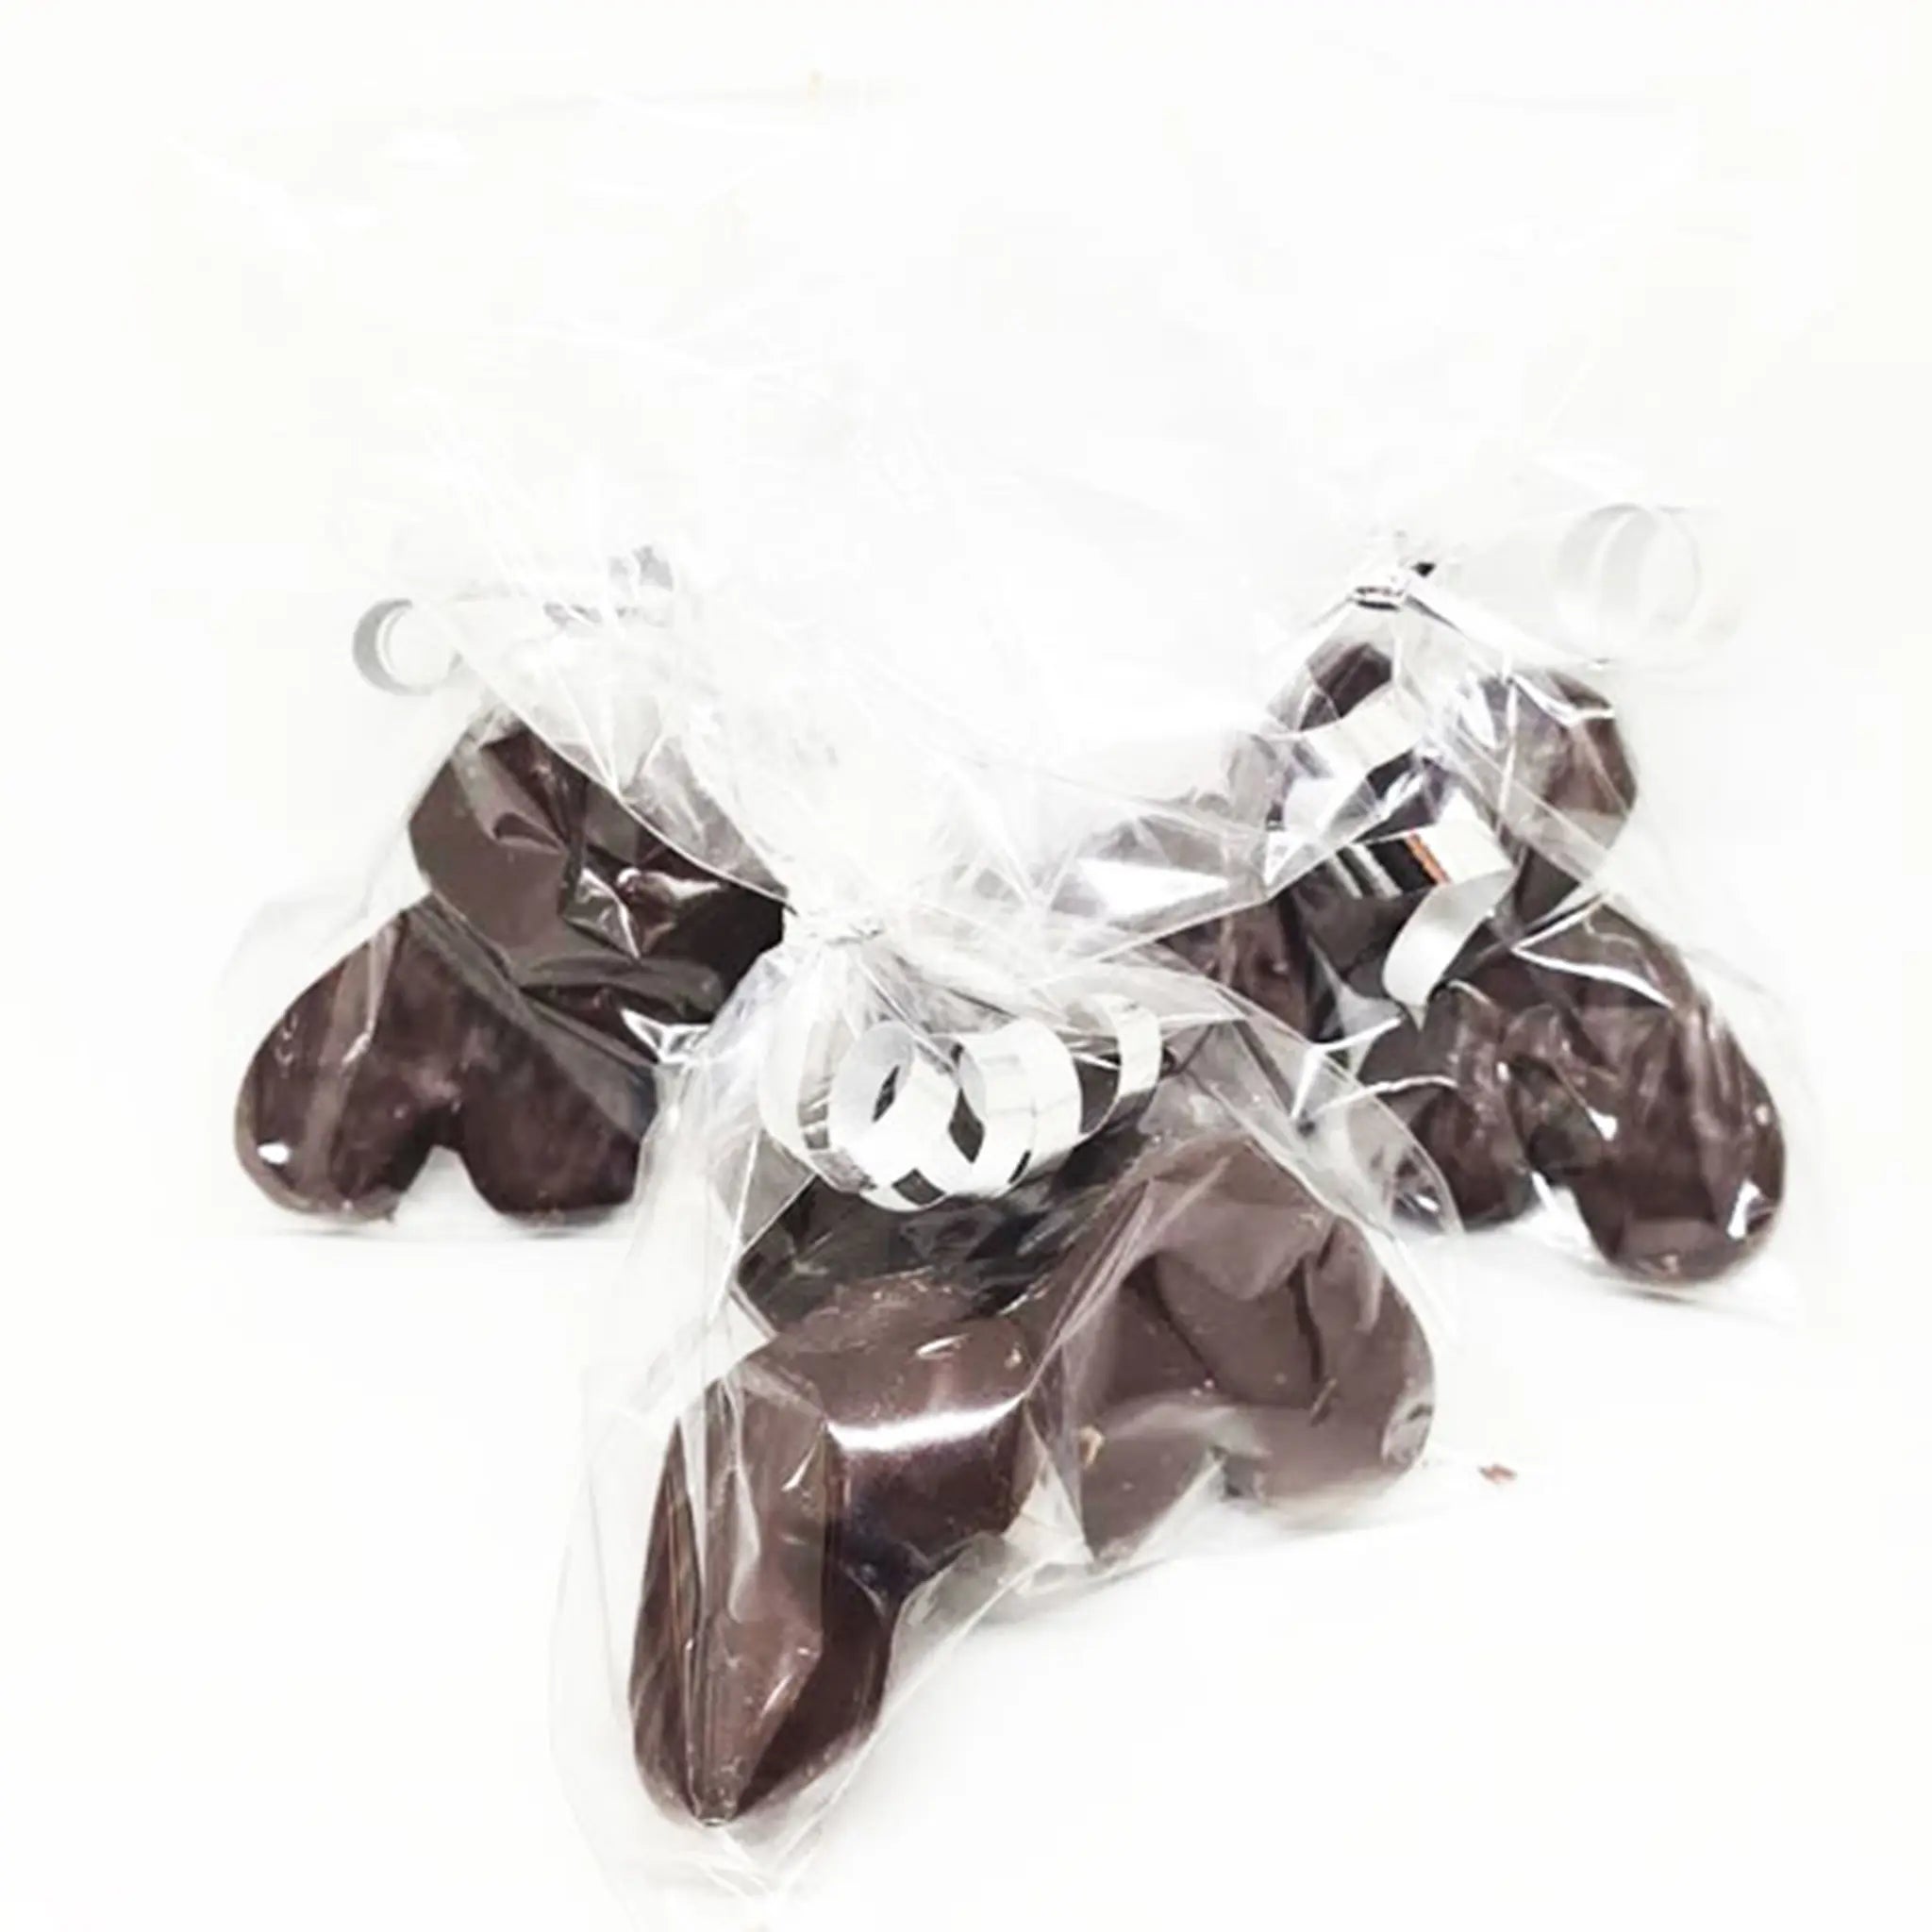 Three transparent bags with silver curly ribbon tied to the top of them. Each bag contains three chocolate covered Kendal Mint Cake Hearts